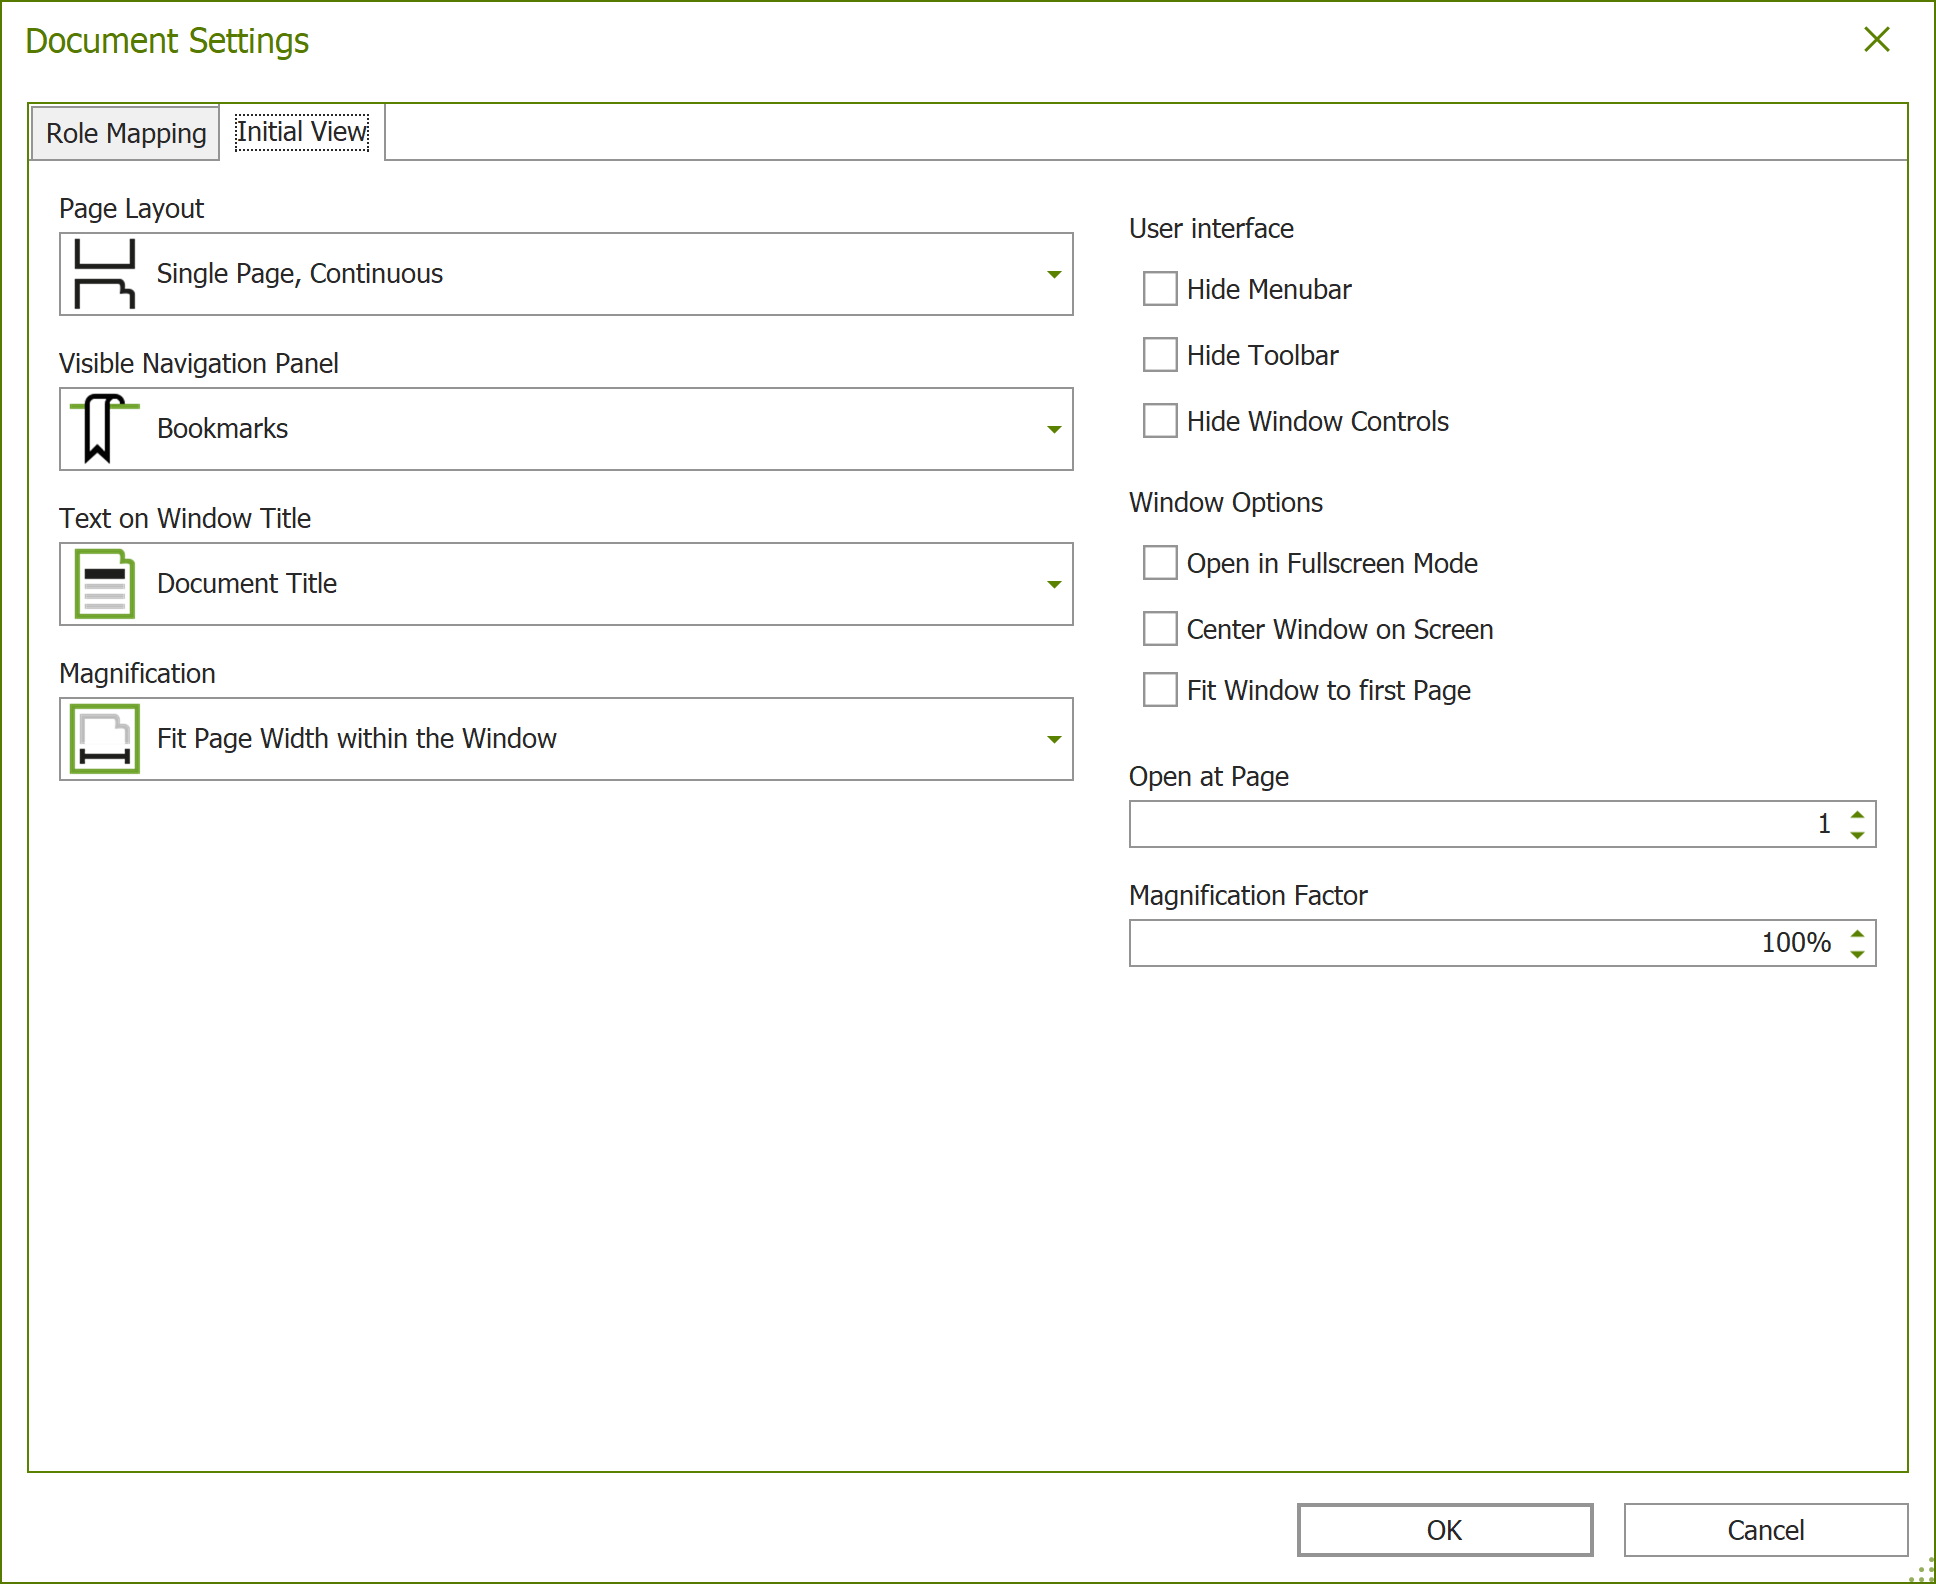 Dialogue box: Document Settings; tab 'Initial View'